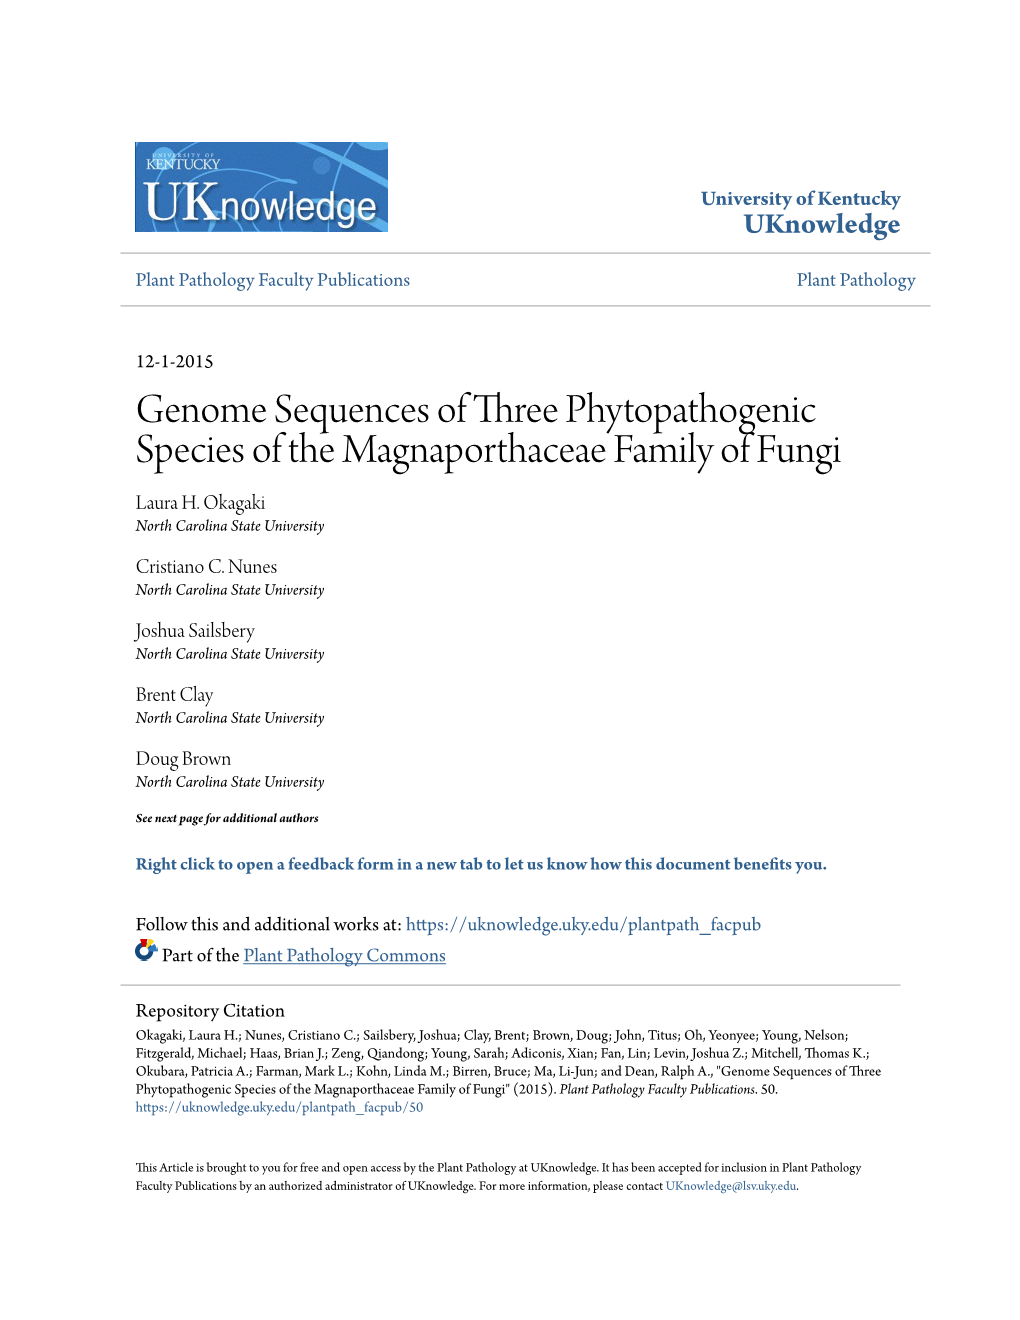 Genome Sequences of Three Phytopathogenic Species of the Magnaporthaceae Family of Fungi Laura H